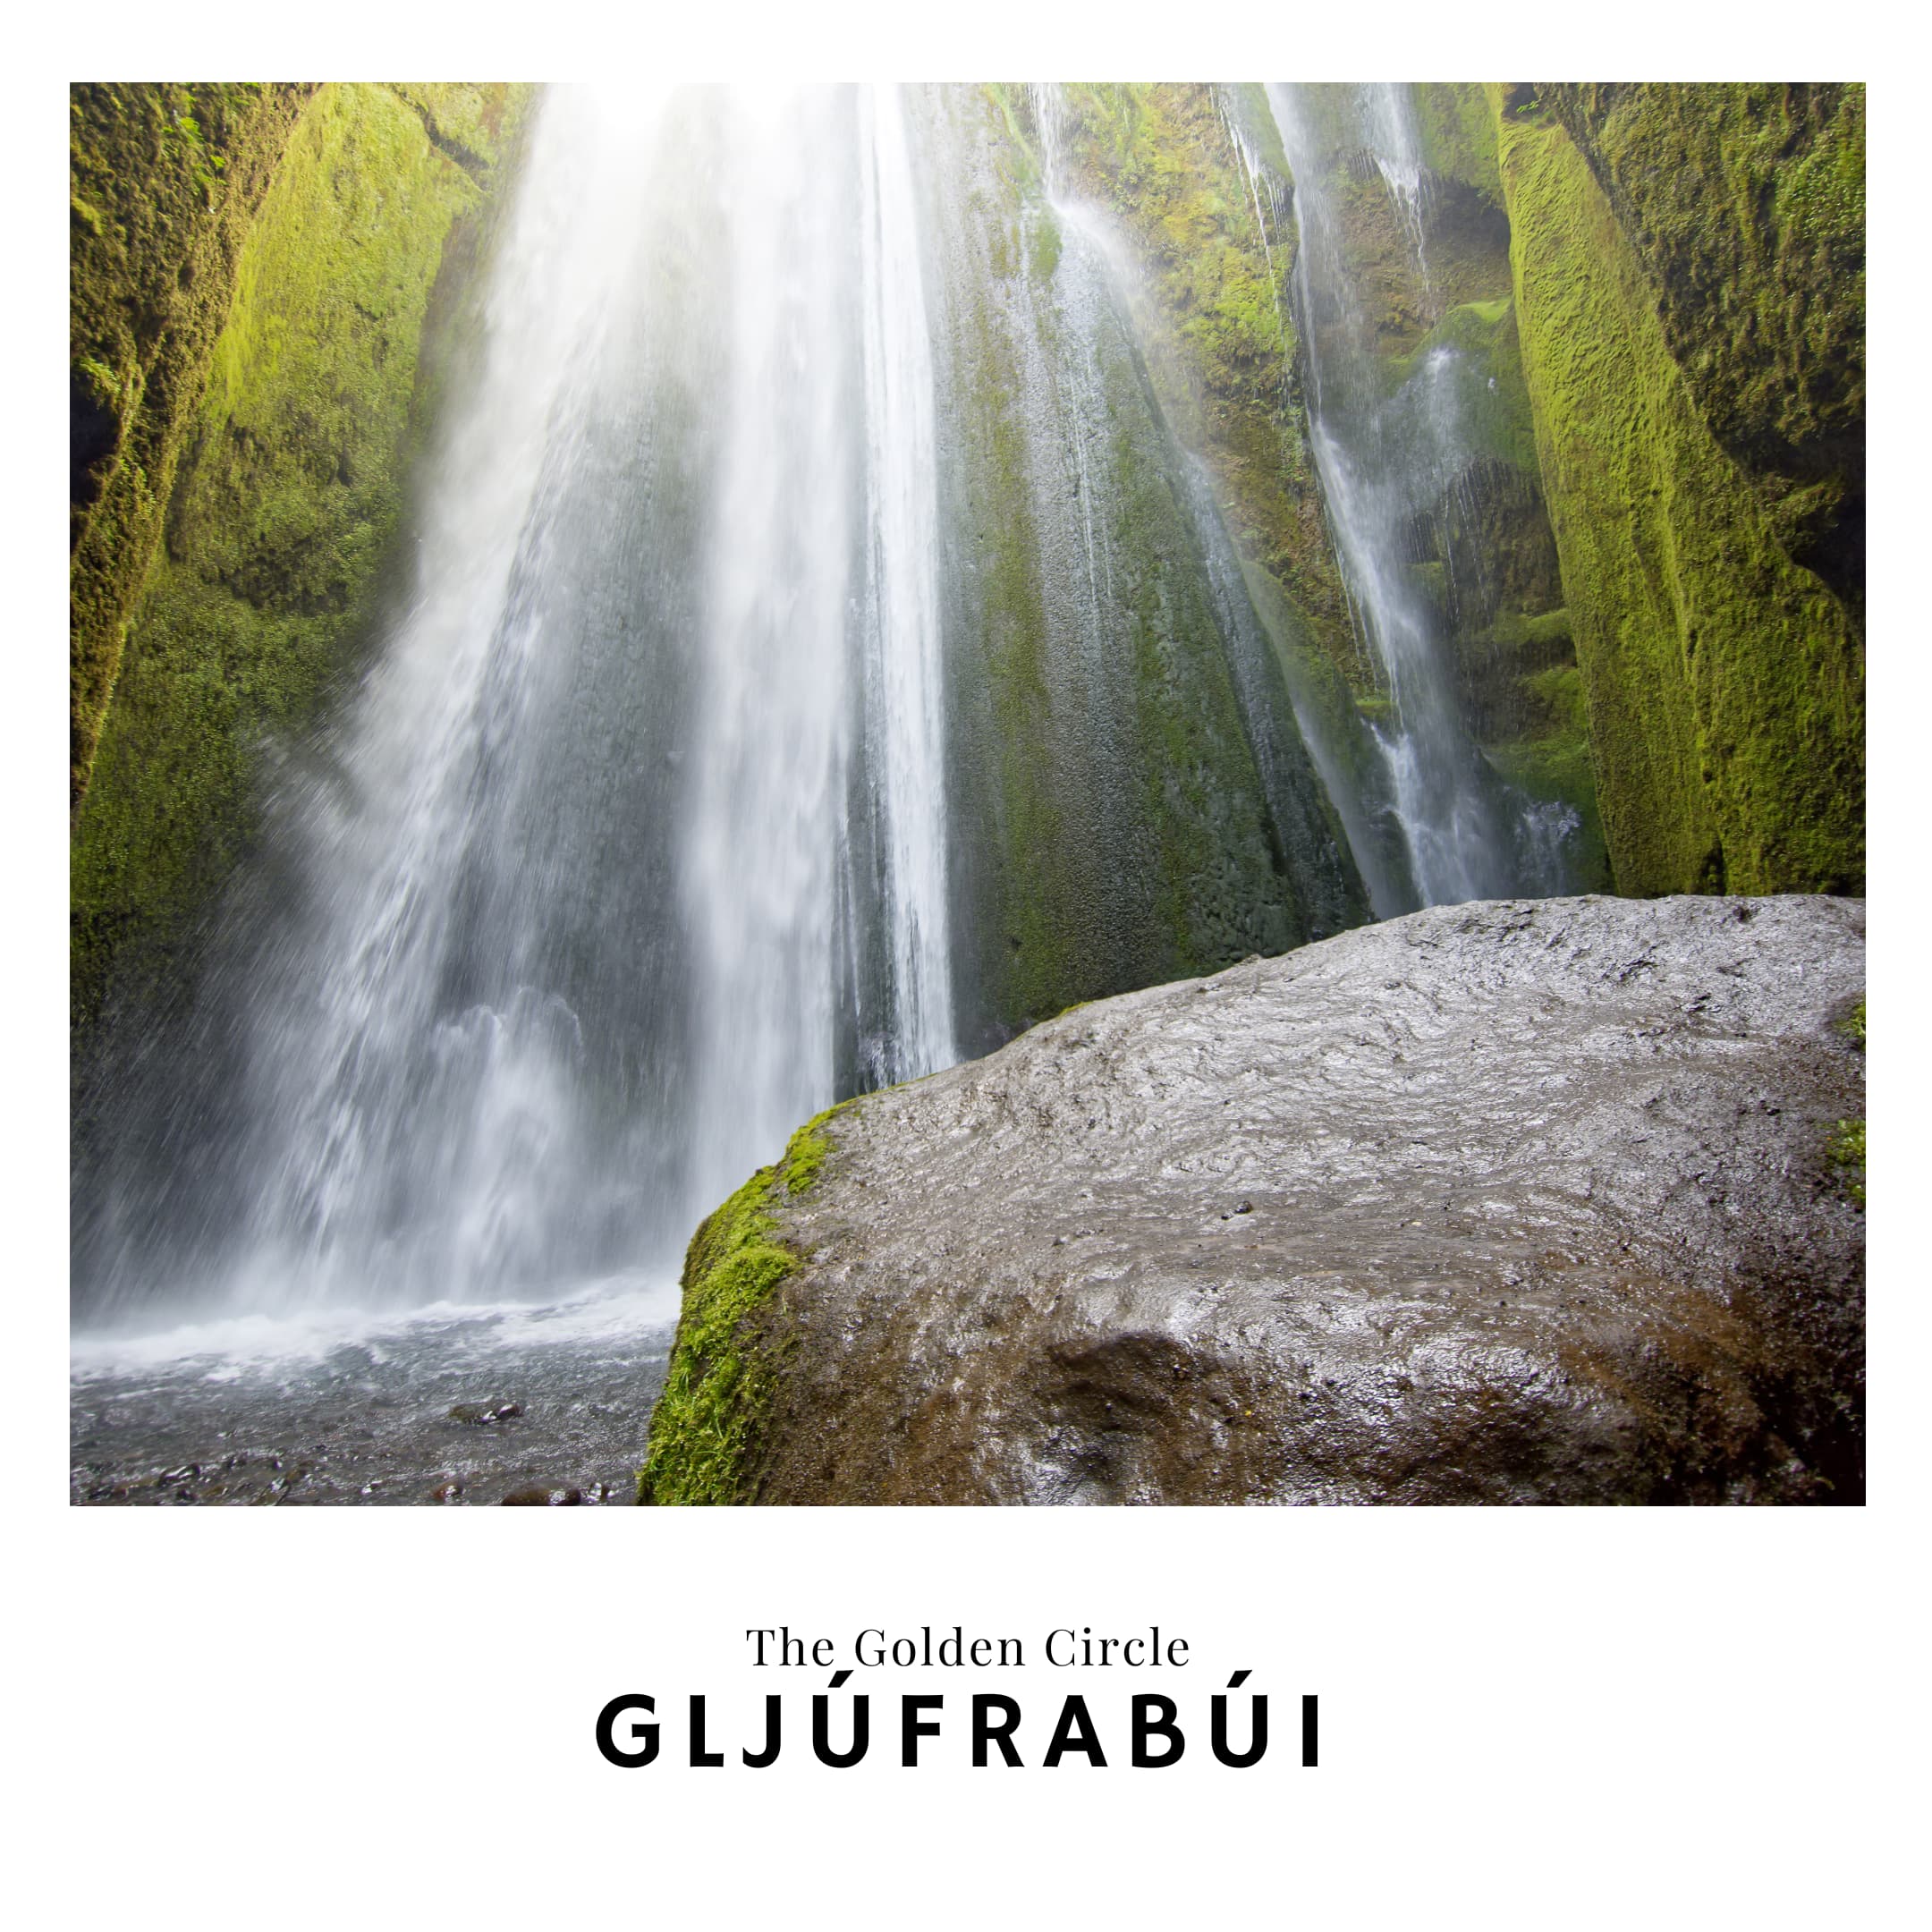 Link to the Gljufrabui Waterfall travel guide on Iceland Golden Circle